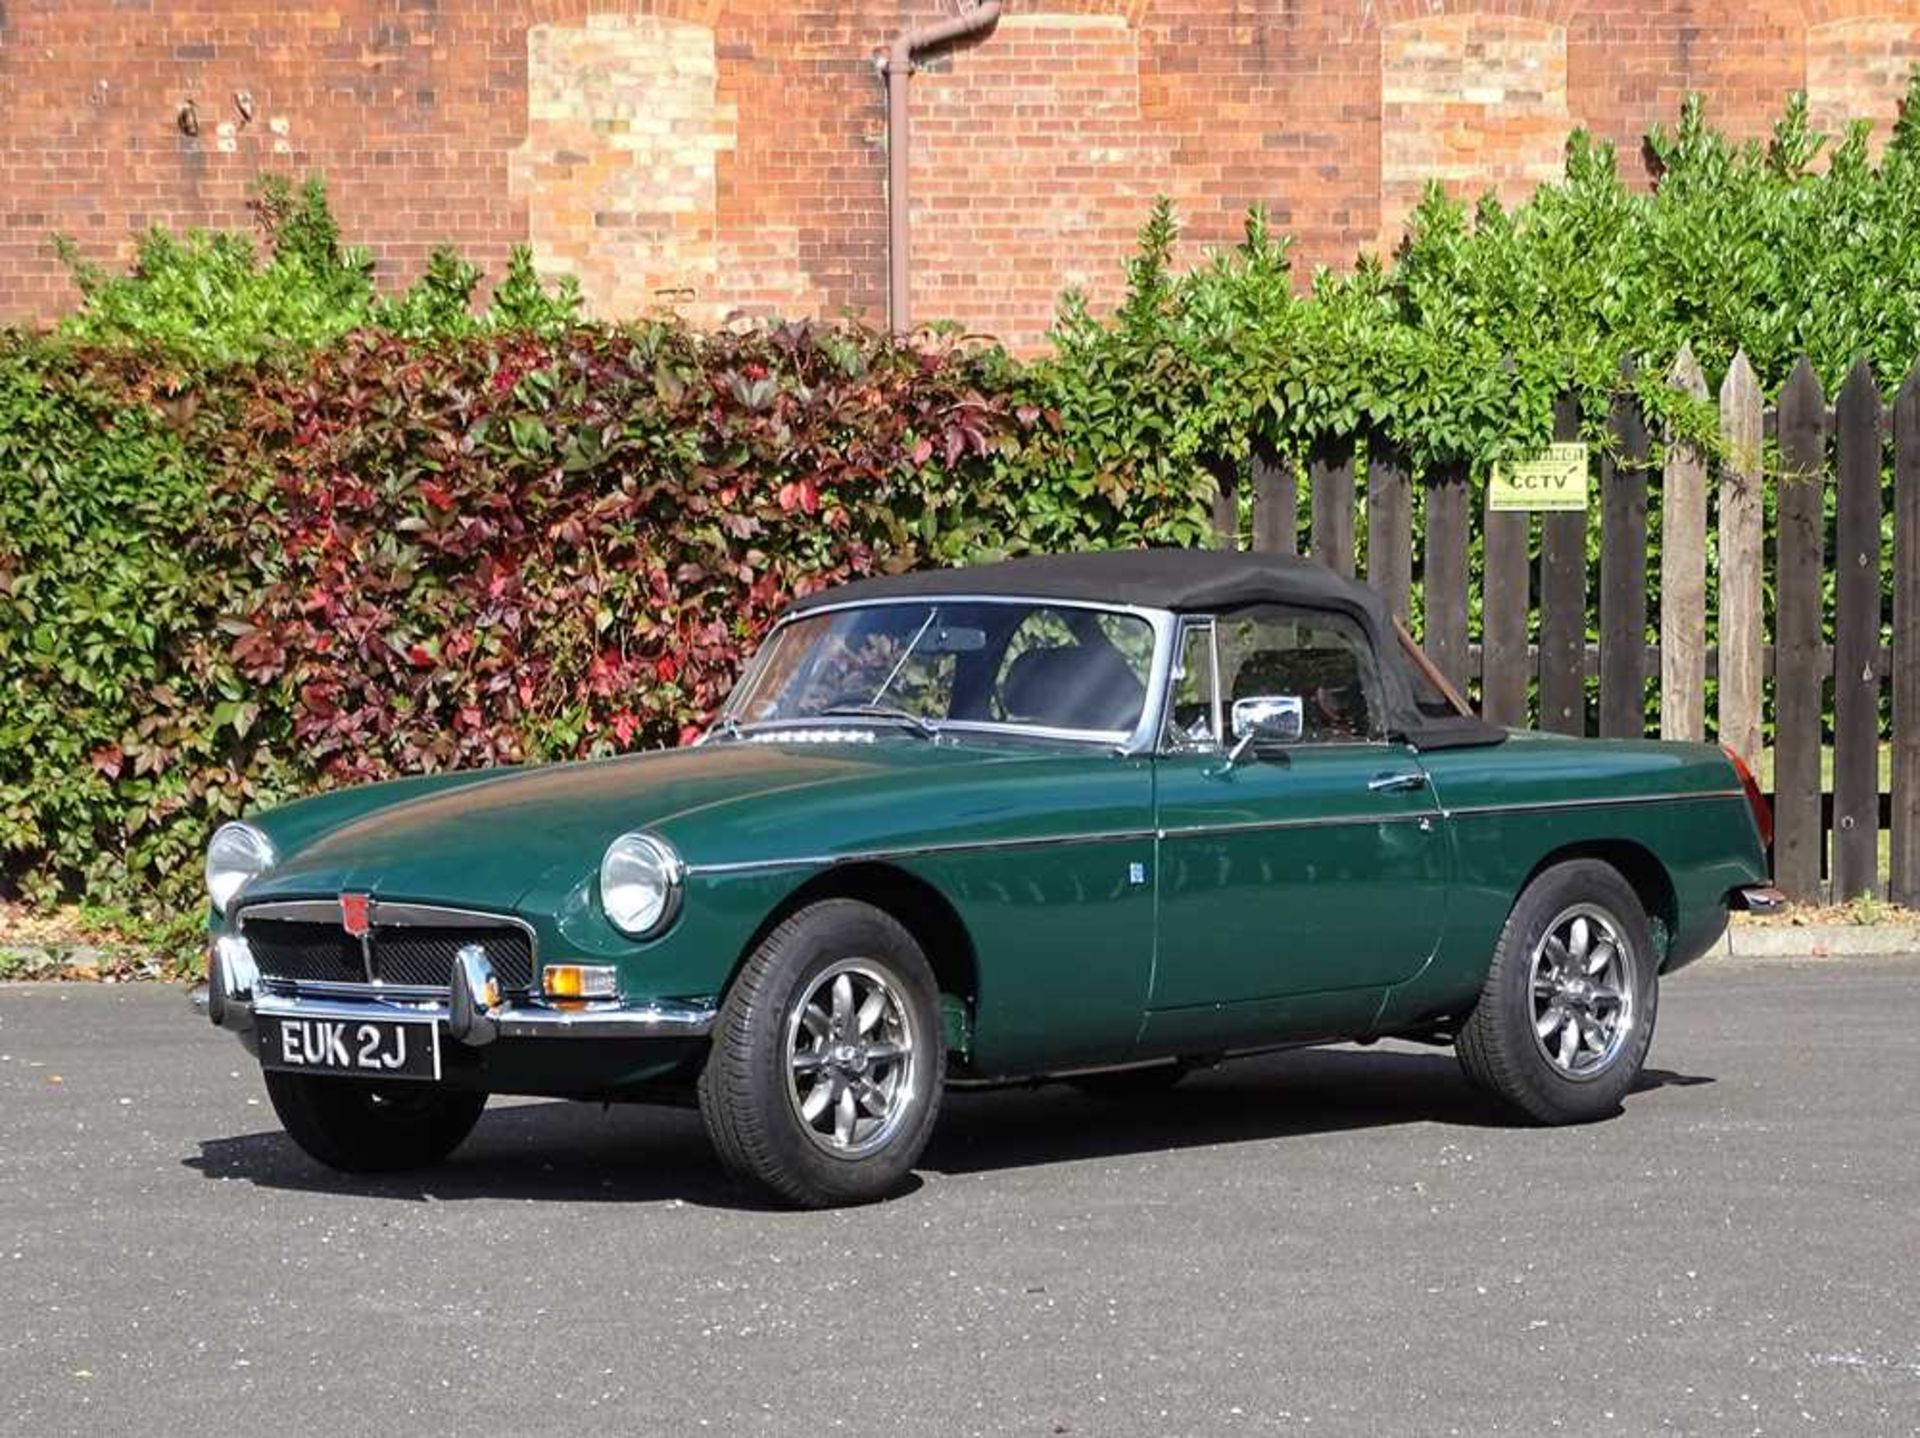 1971 MG B Roadster Restored at a cost of c.£33,000 - Image 19 of 43